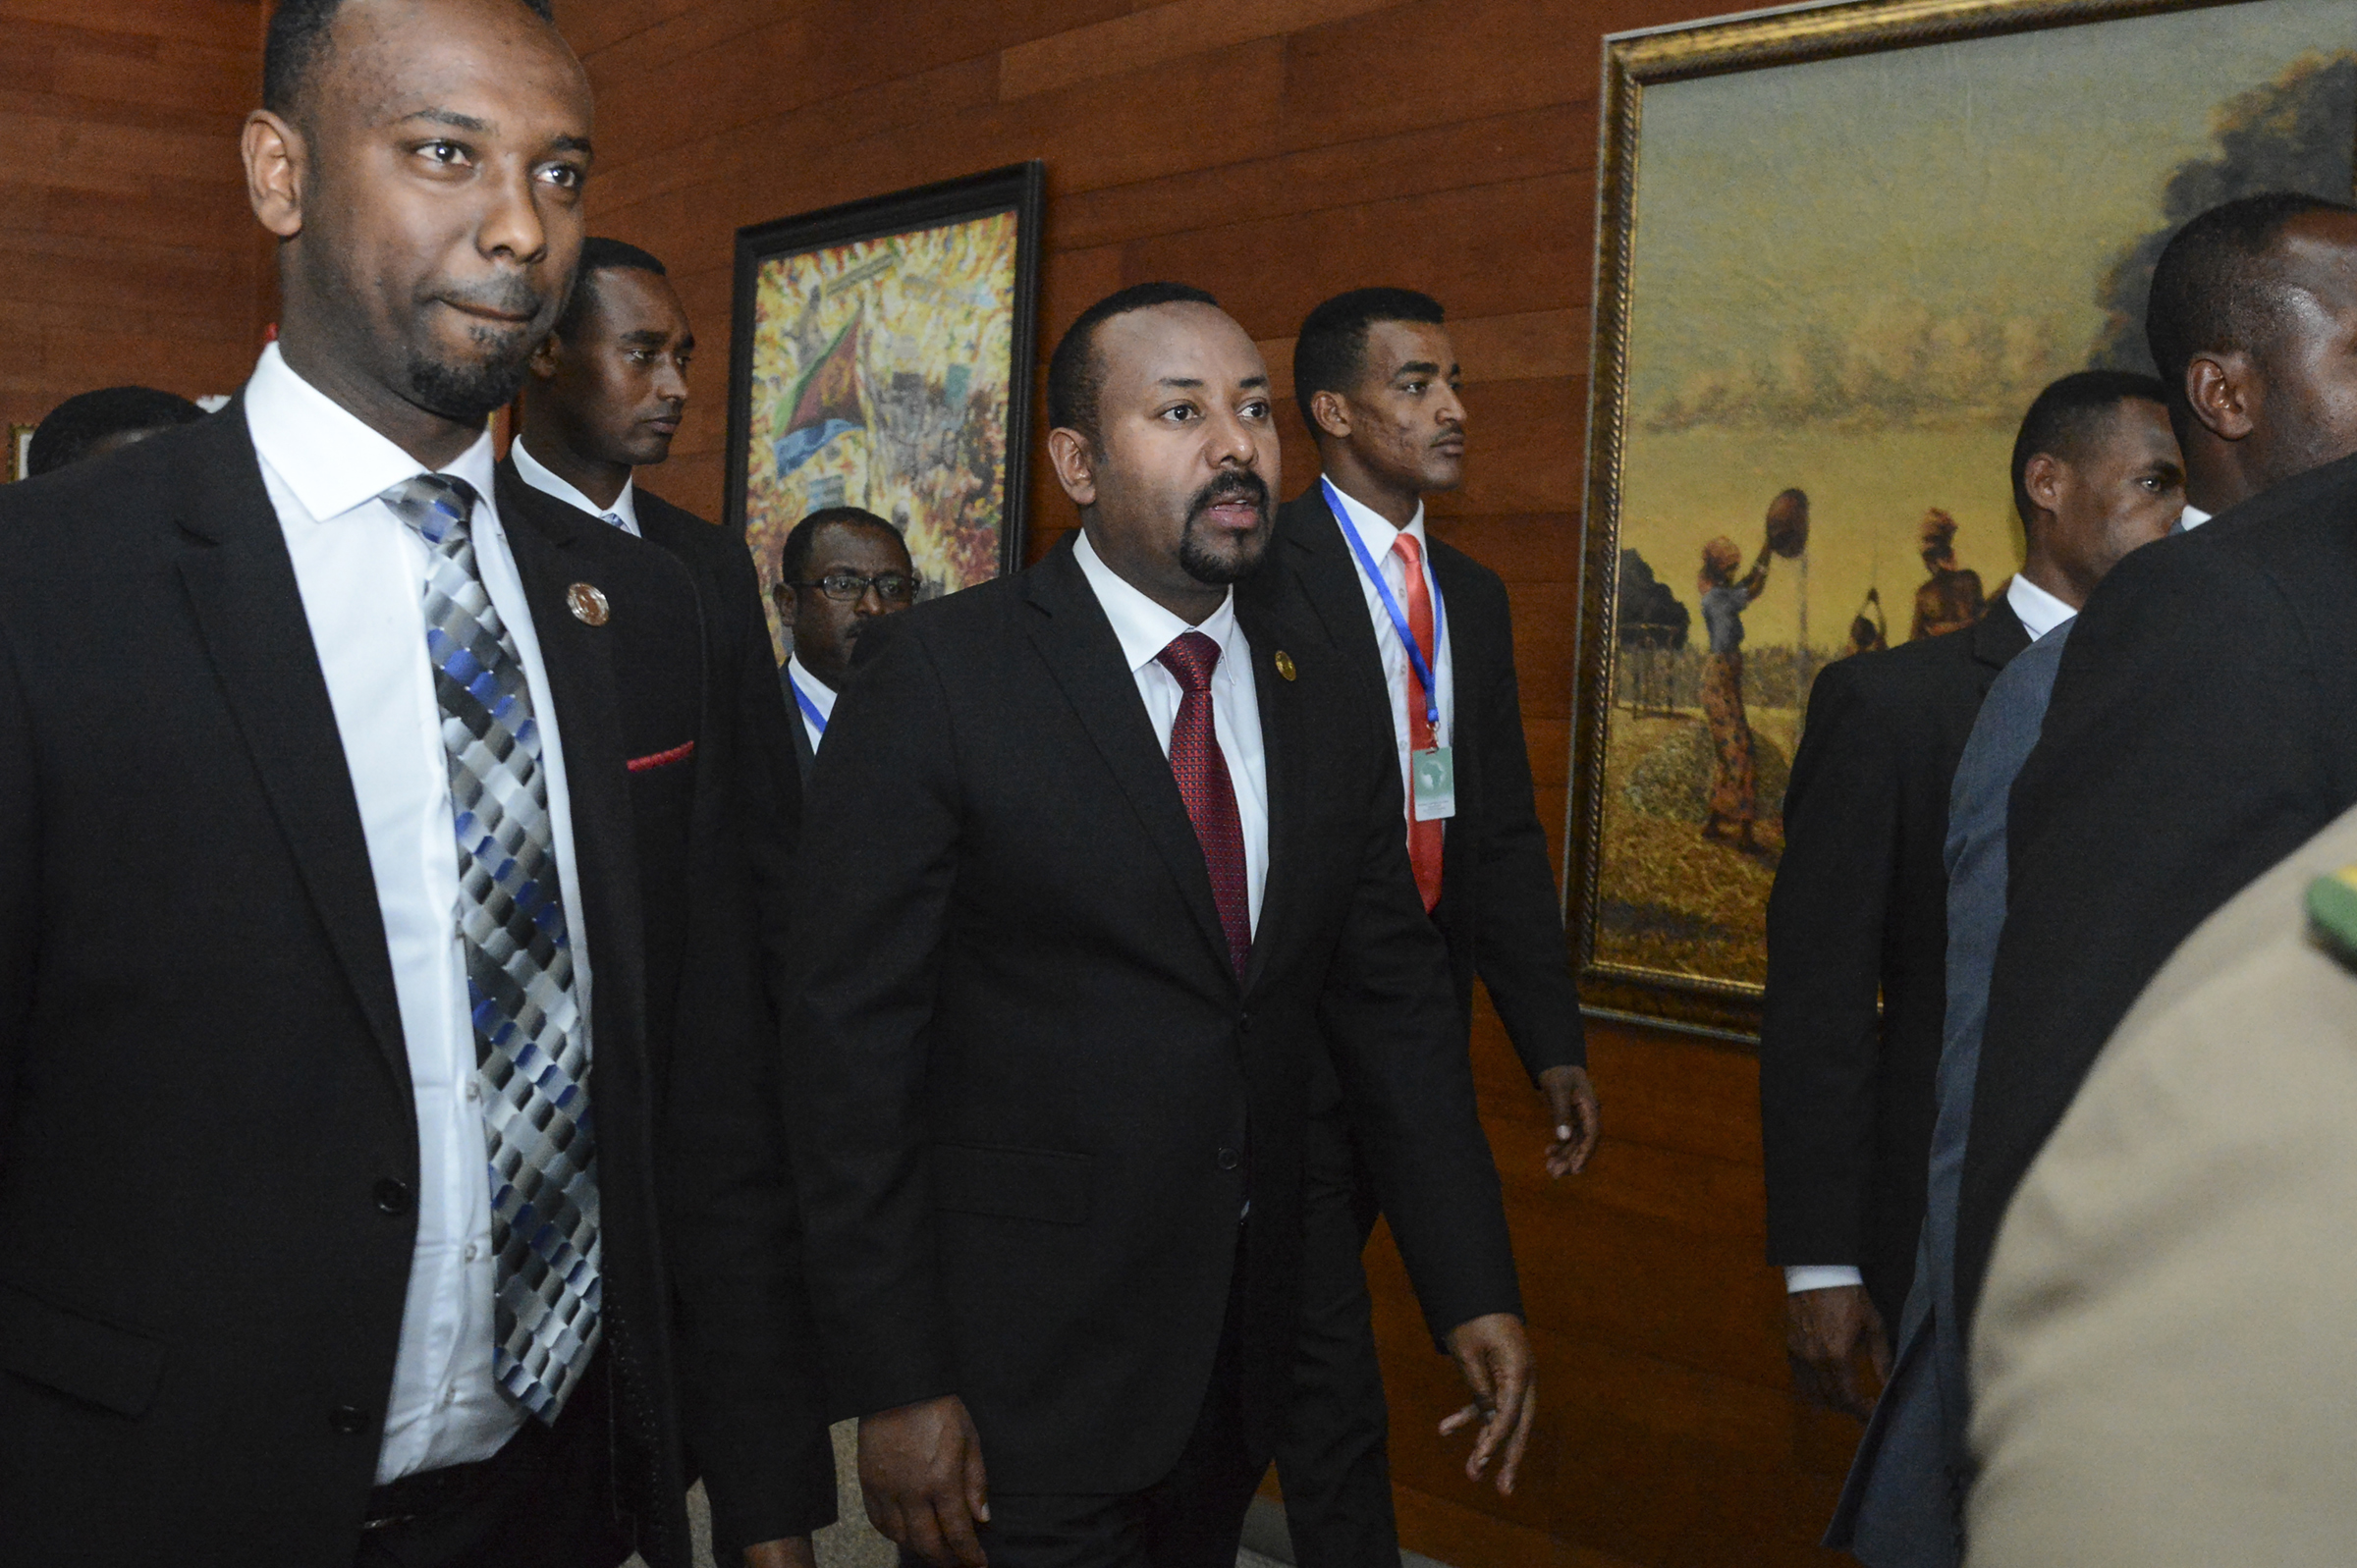 Ethiopia's Prime Minister Abiy Ahmed, center, arrives for the opening session of the 33rd African Union Summit in Addis Ababa, Ethiopia, in Feb. 2020. (AP)